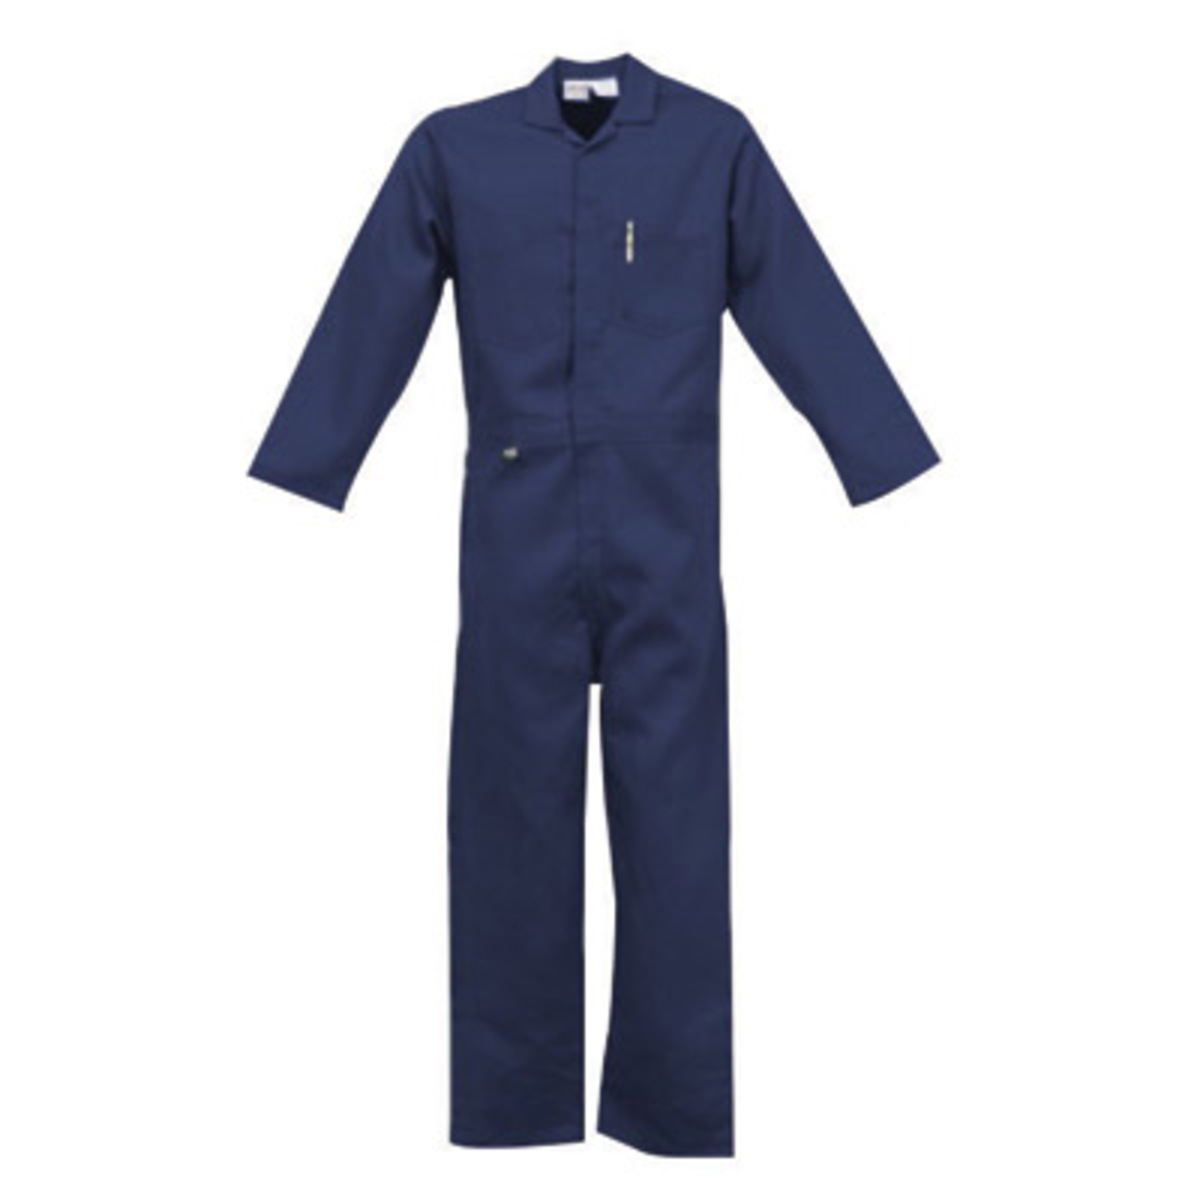 Stanco Safety Products™ Size 2X Navy Blue Indura® UltraSoft® Arc Rated Flame Resistant Coveralls With Front Zipper Closure